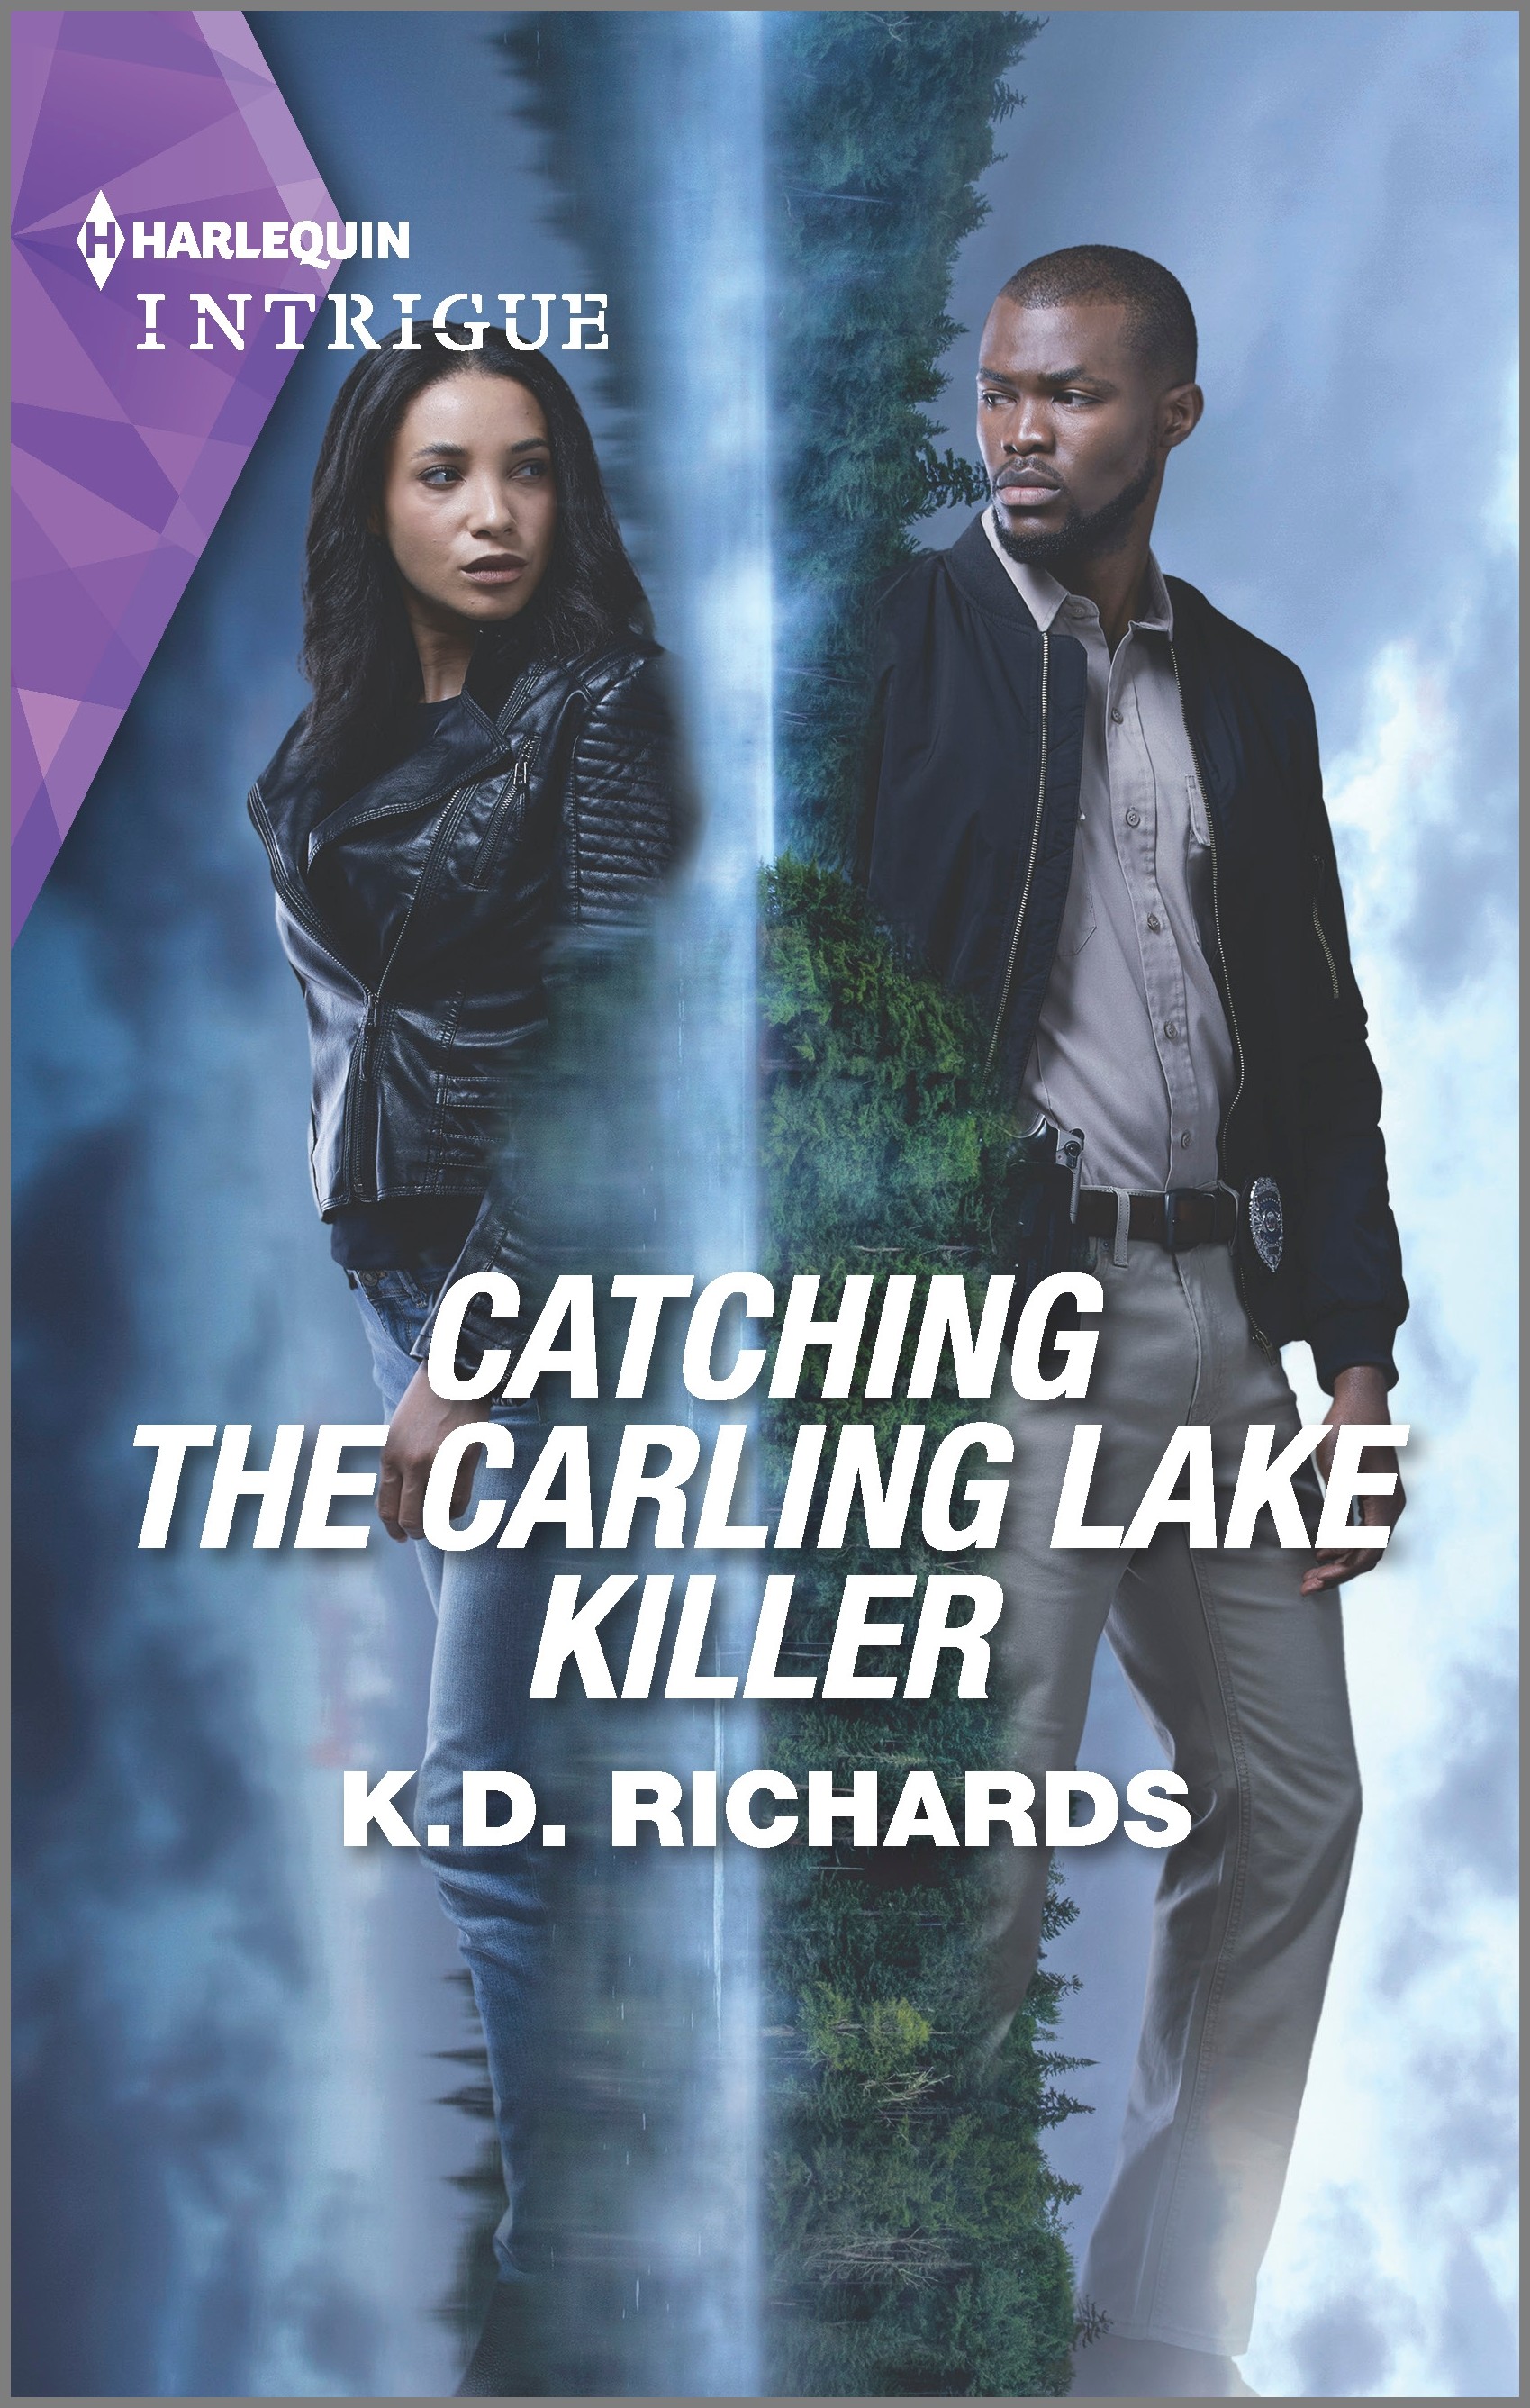 CATCHING THE CARLING LAKE KILLER by K.D. Richards